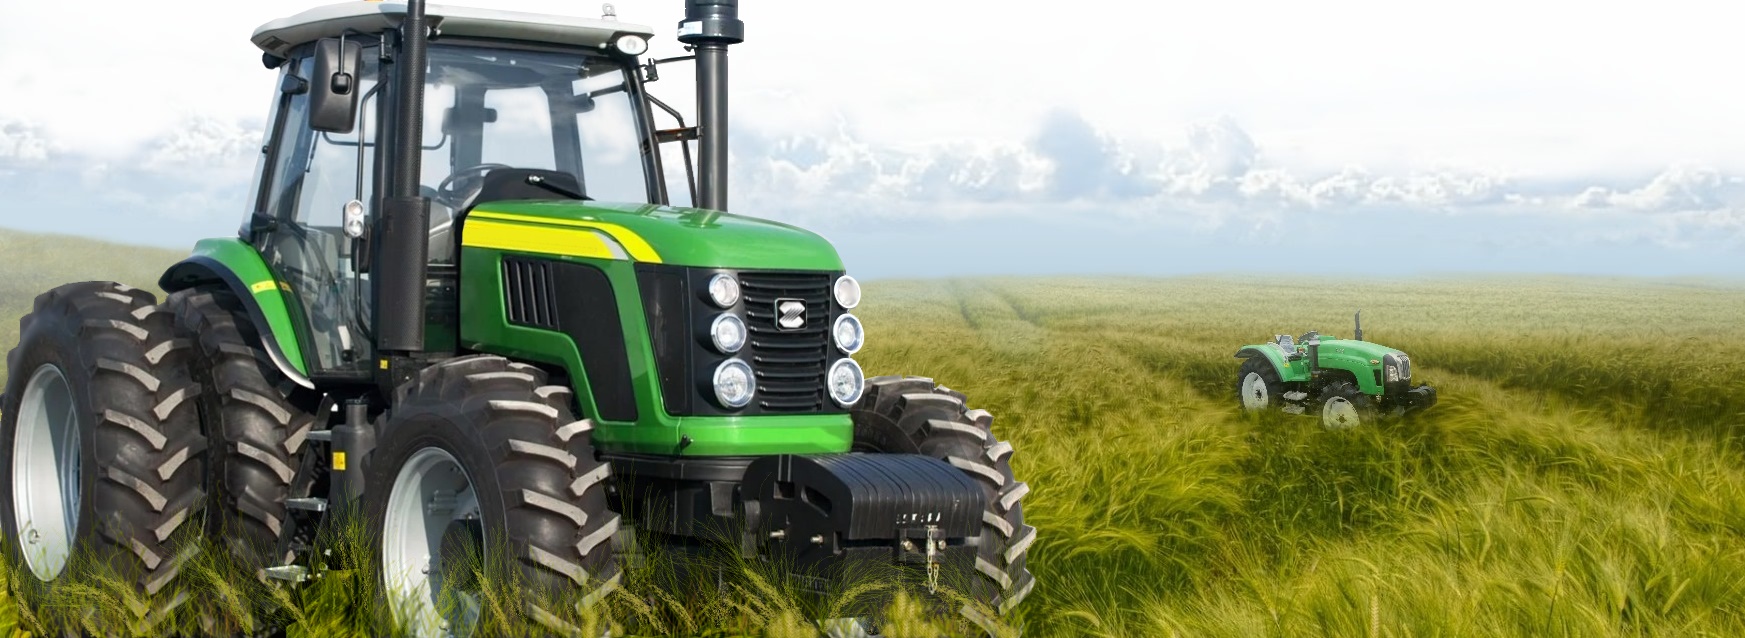 NEW agriculture MACHINERY FOR AFRICA